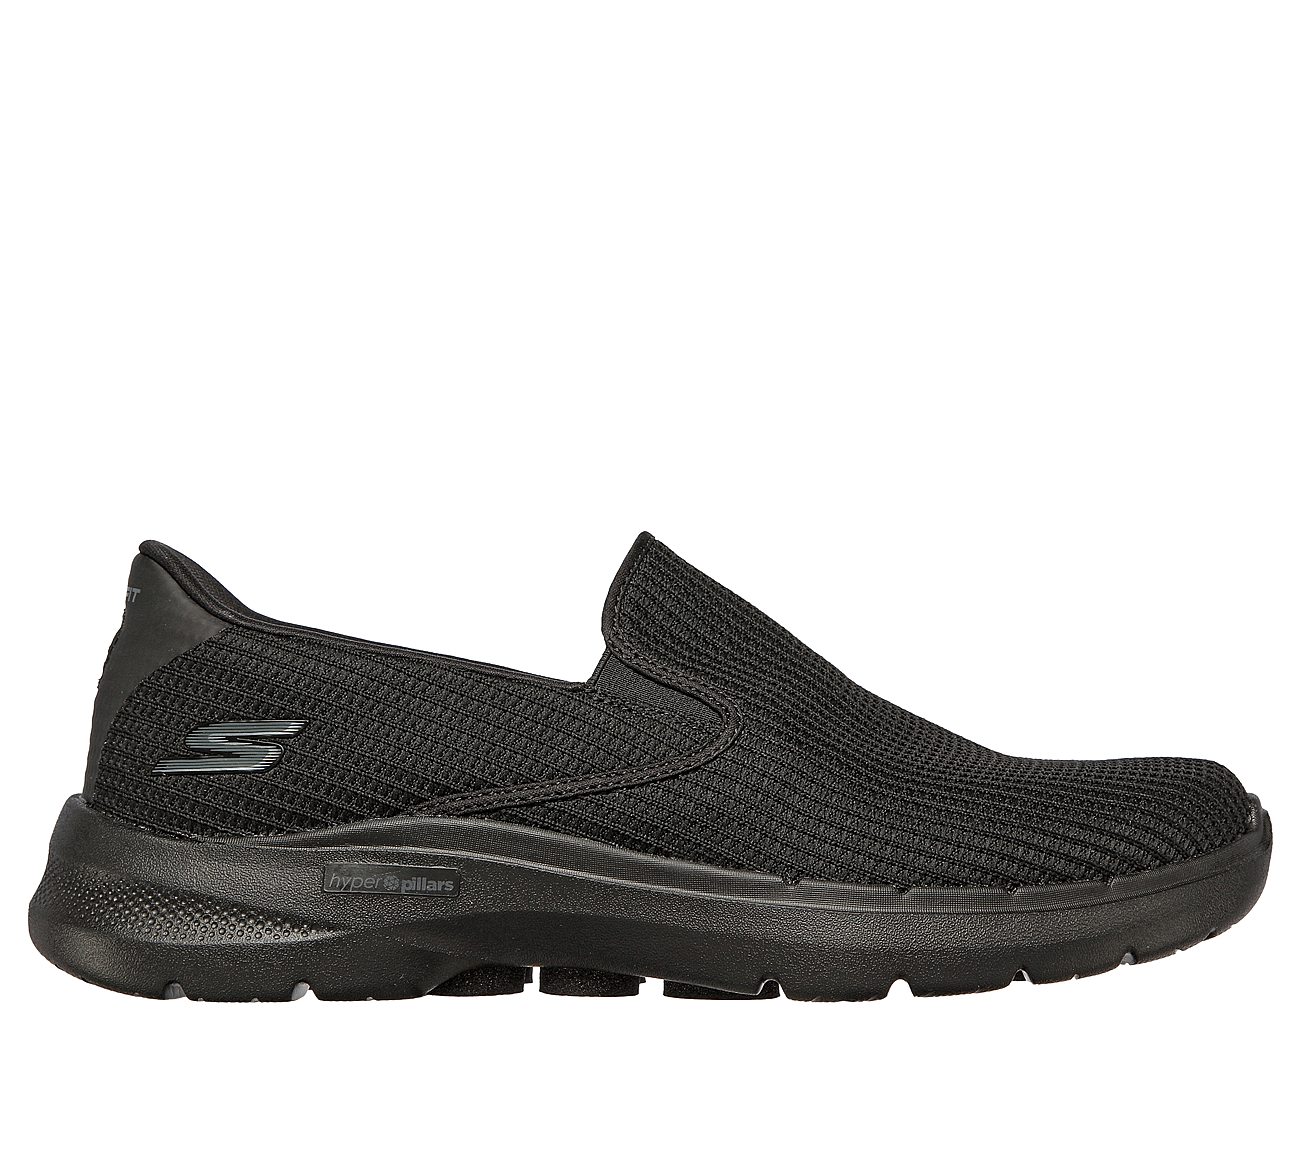 Skechers Black Go Walk 6 Anaglyph Mens Slip On Shoes Style ID: 216201 ...